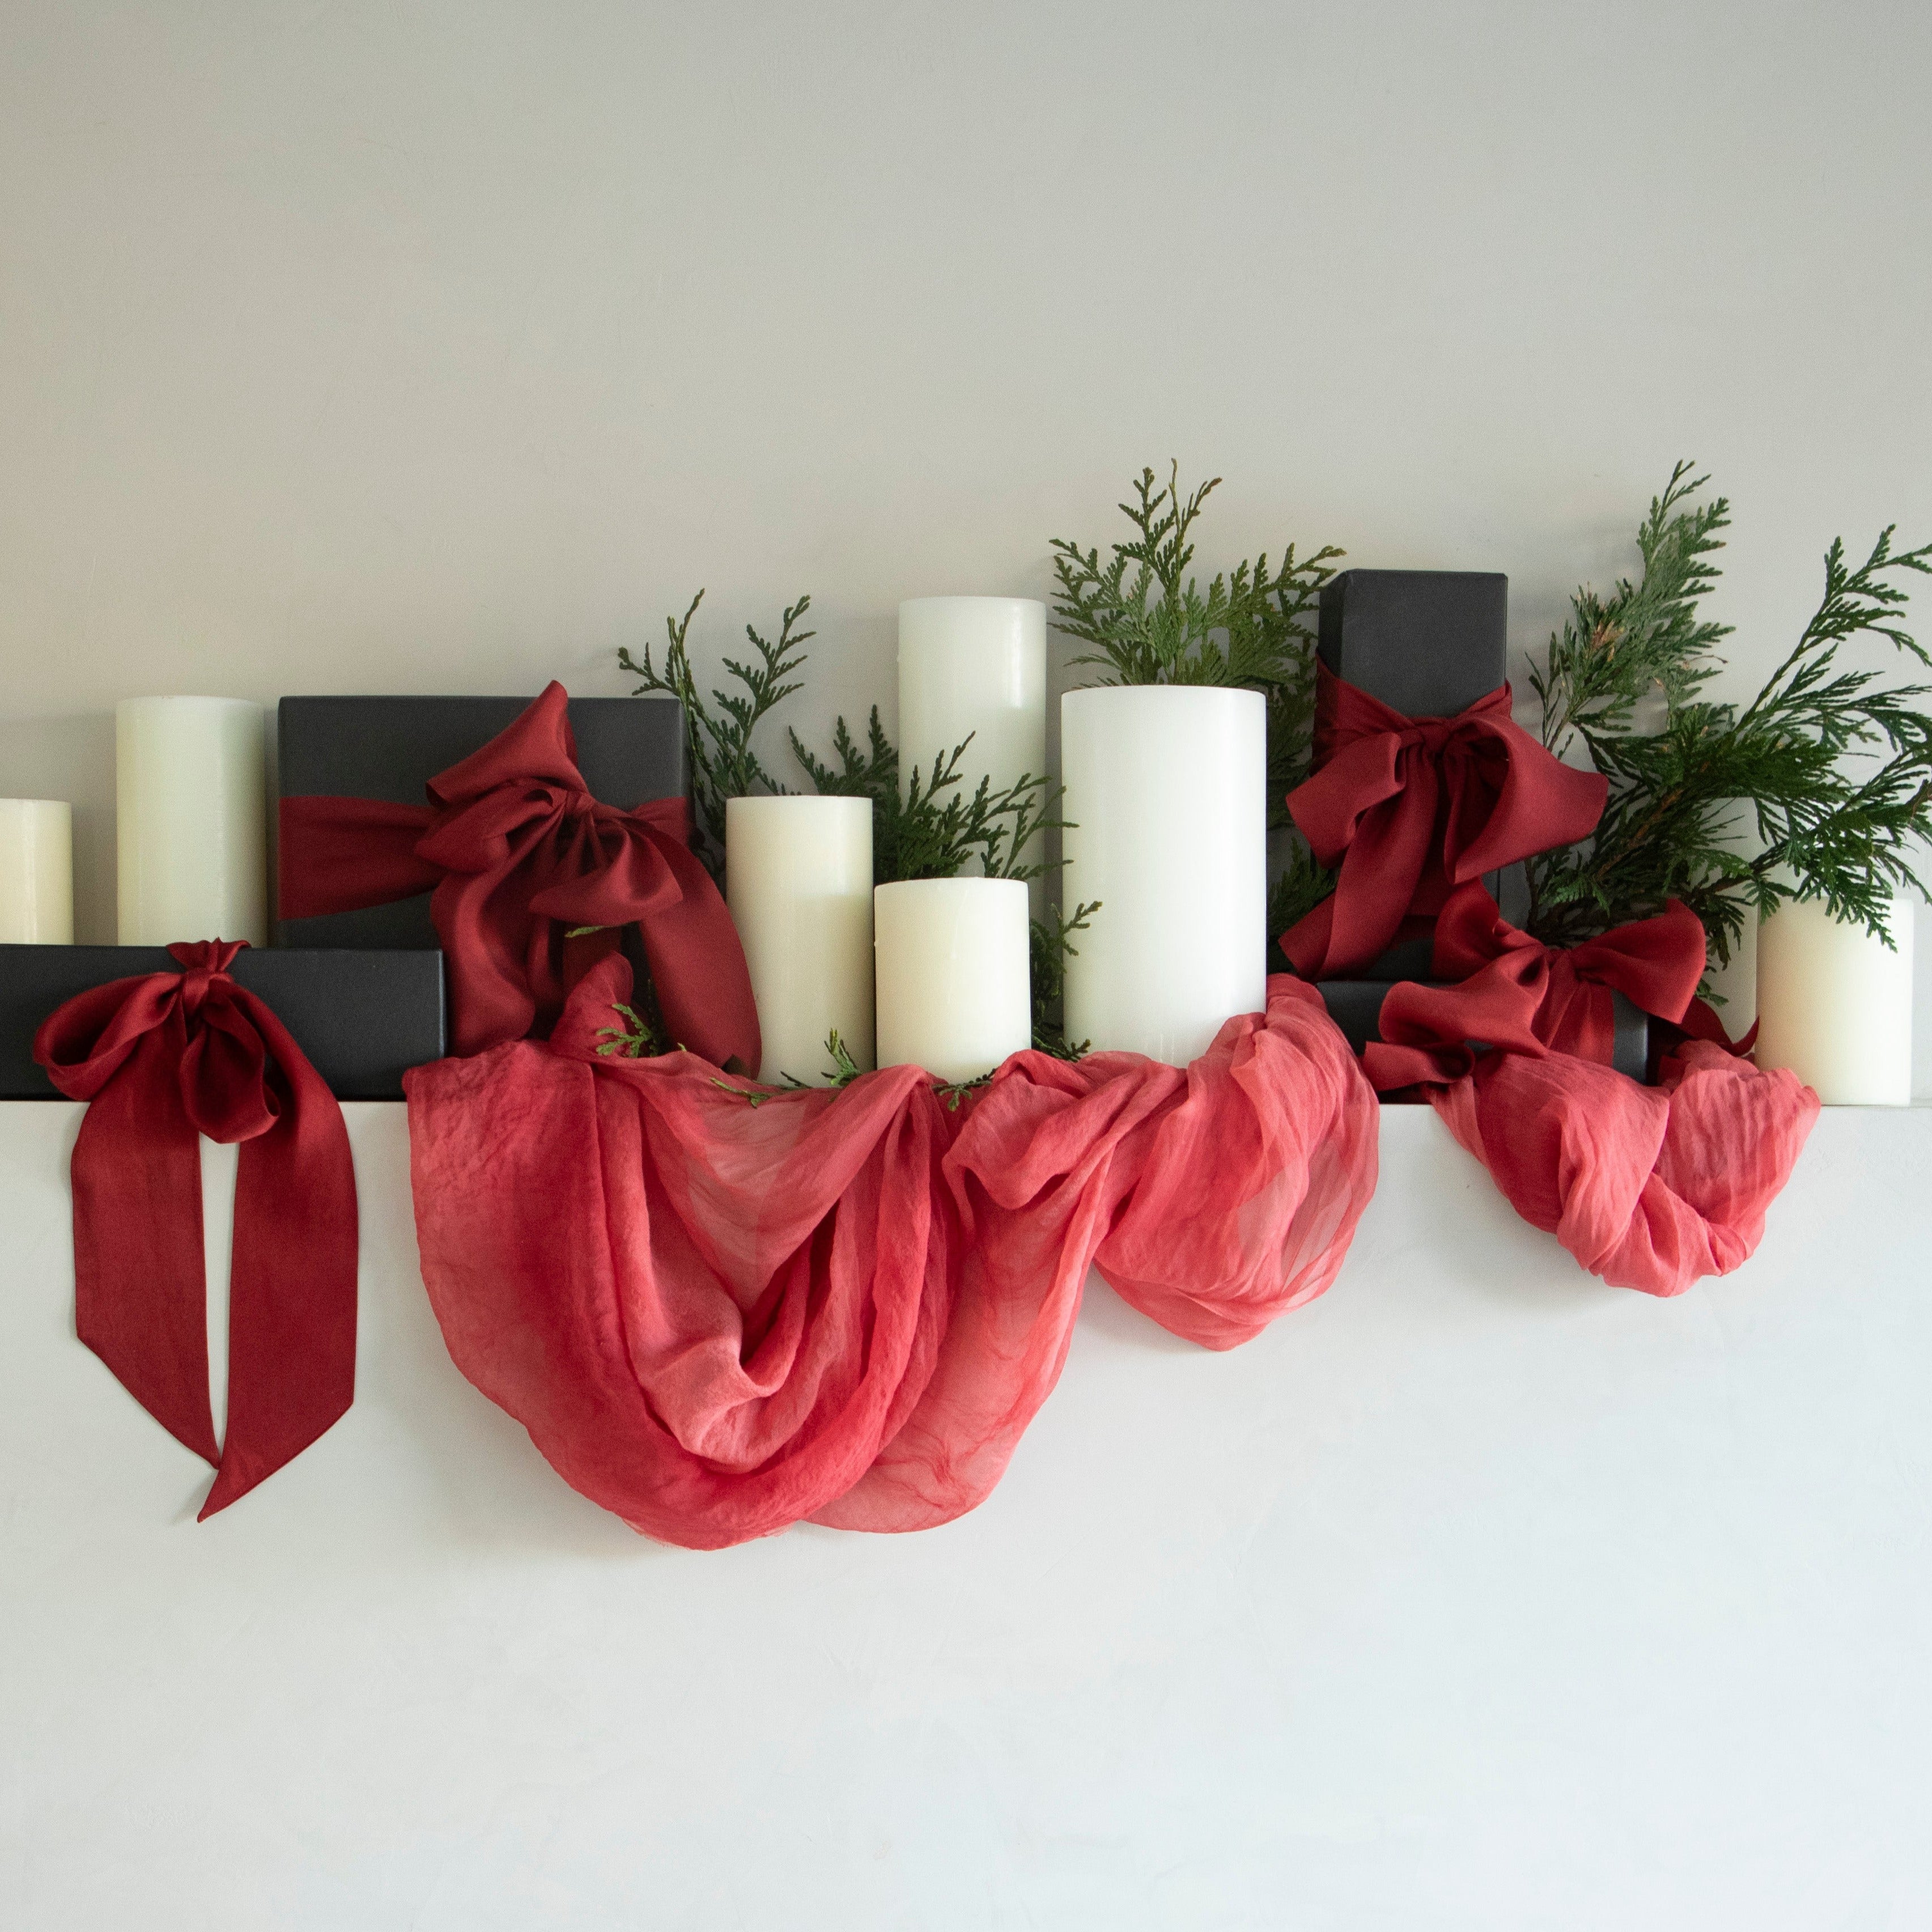 Scarlet Red Christmas home decor